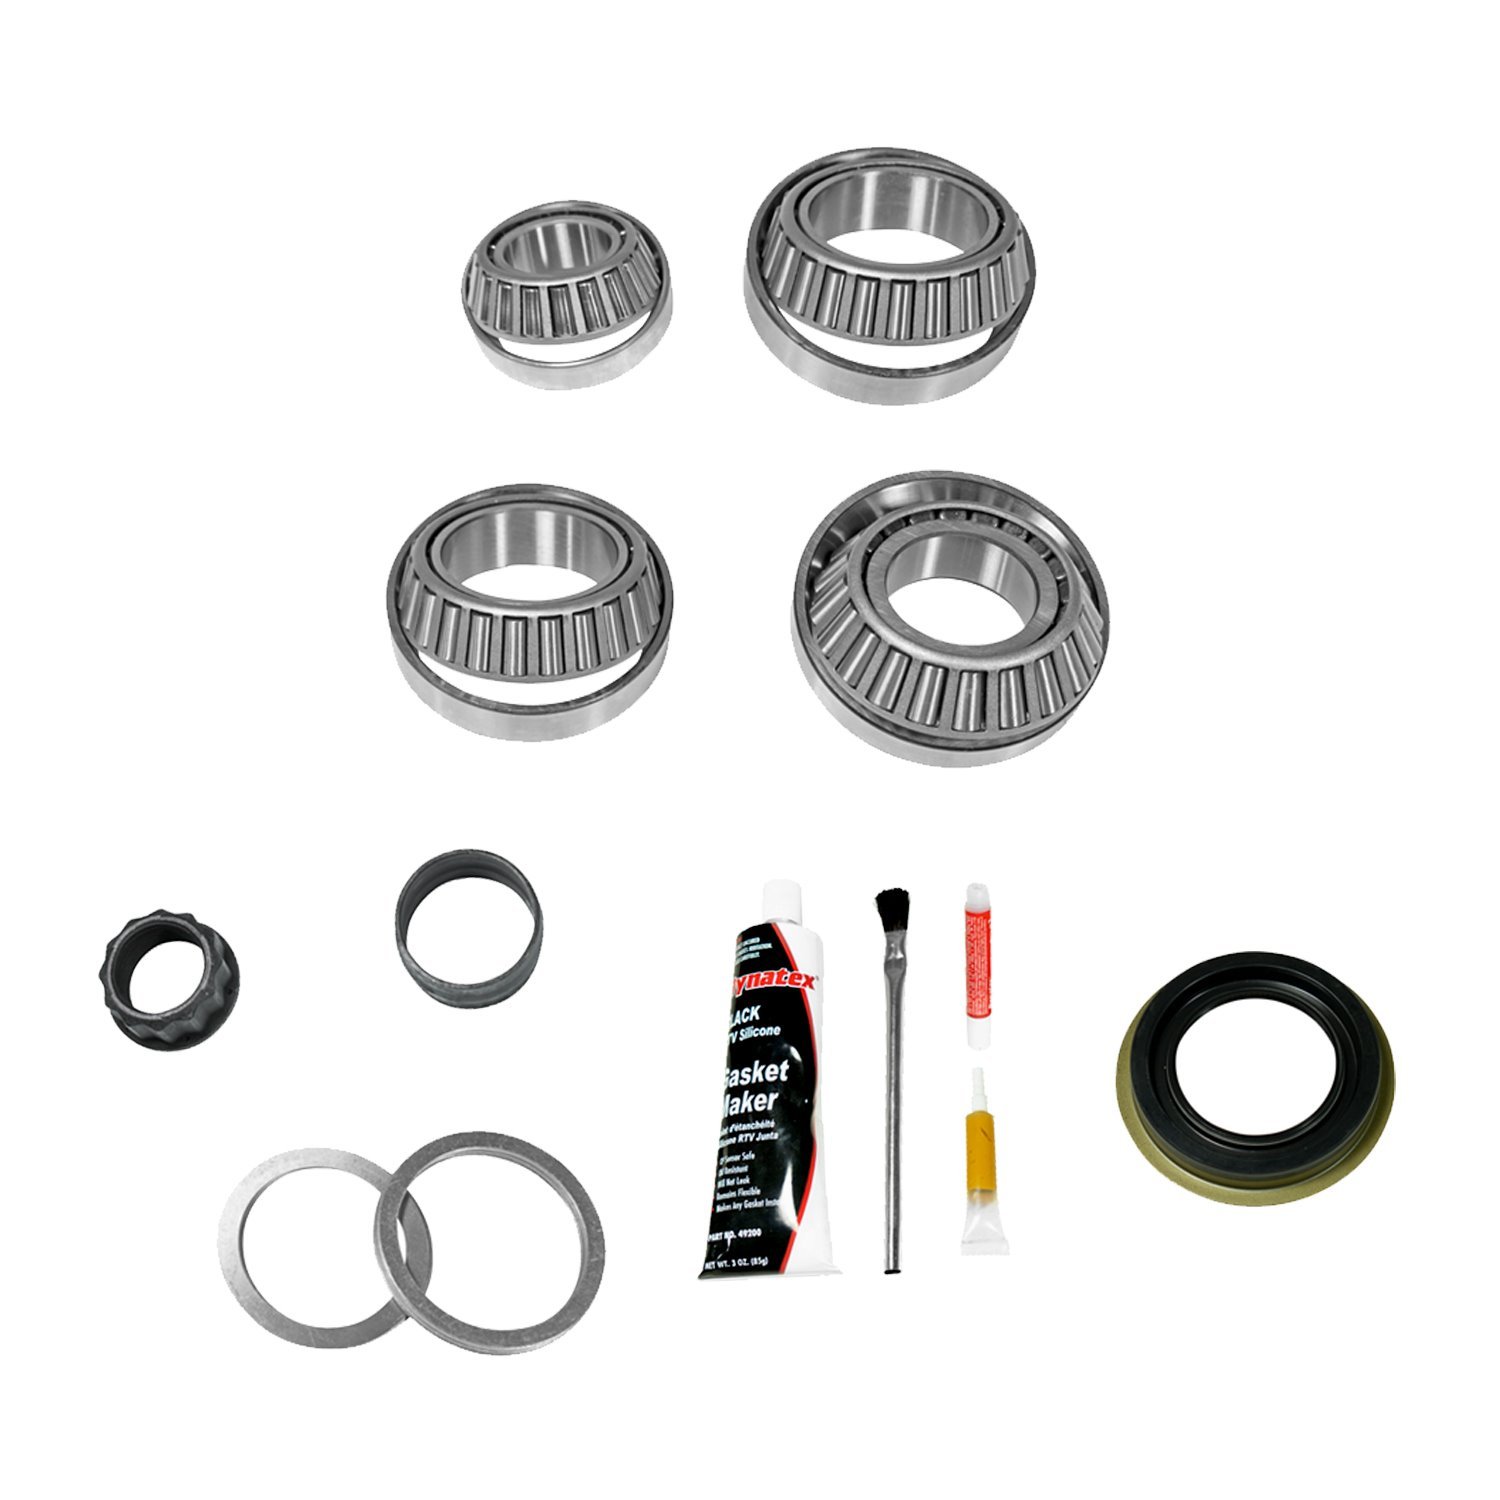 AAM115K1002 Differential Master Overhaul Kit for 2011-2019 GM & Ram 2500, 3500 Trucks w/AAM Differential